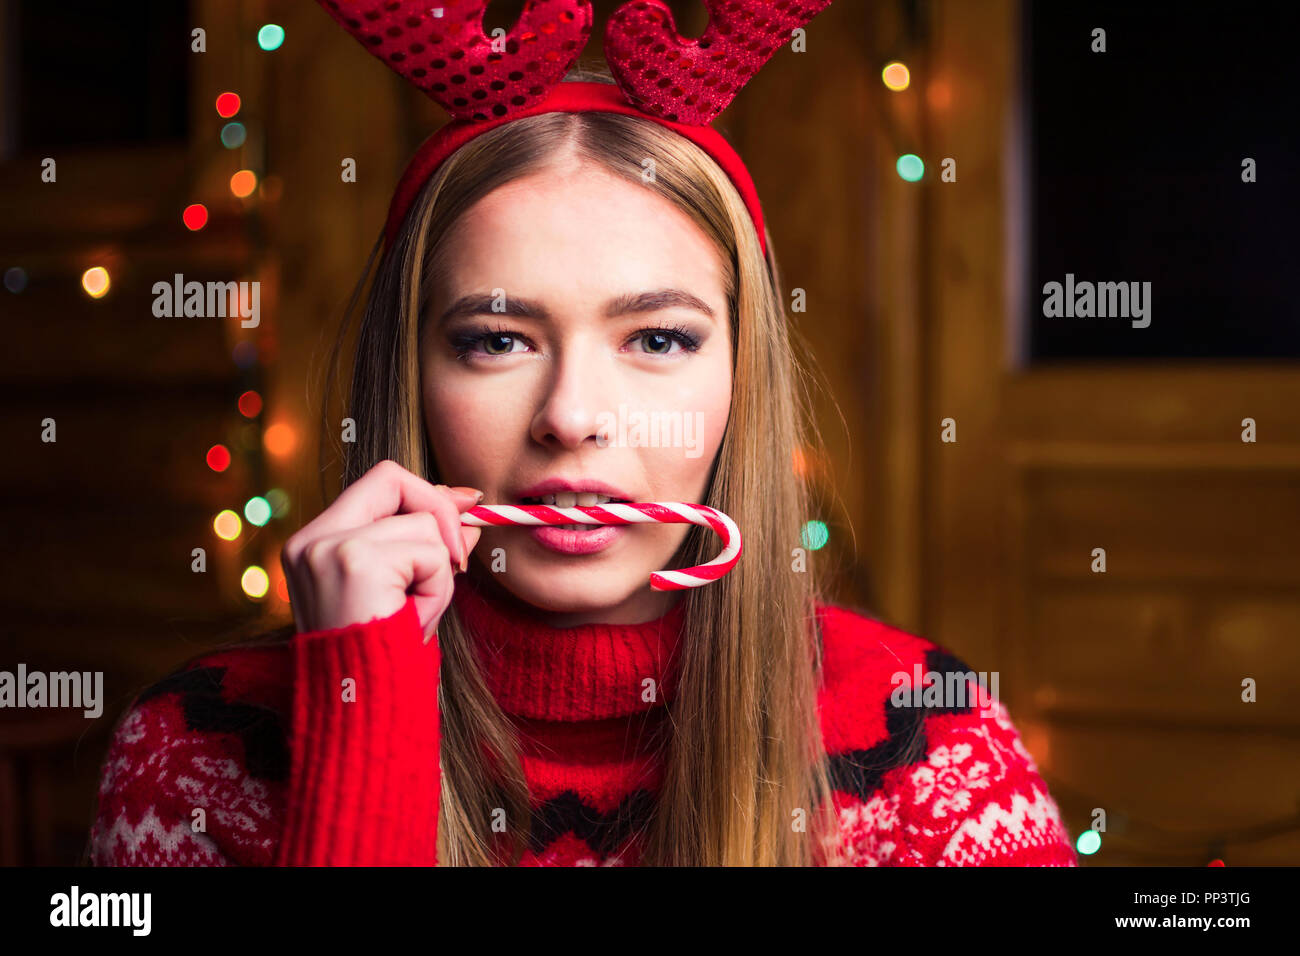 Beautiful girl with lollipop and festive lights in a log cabin Stock Photo